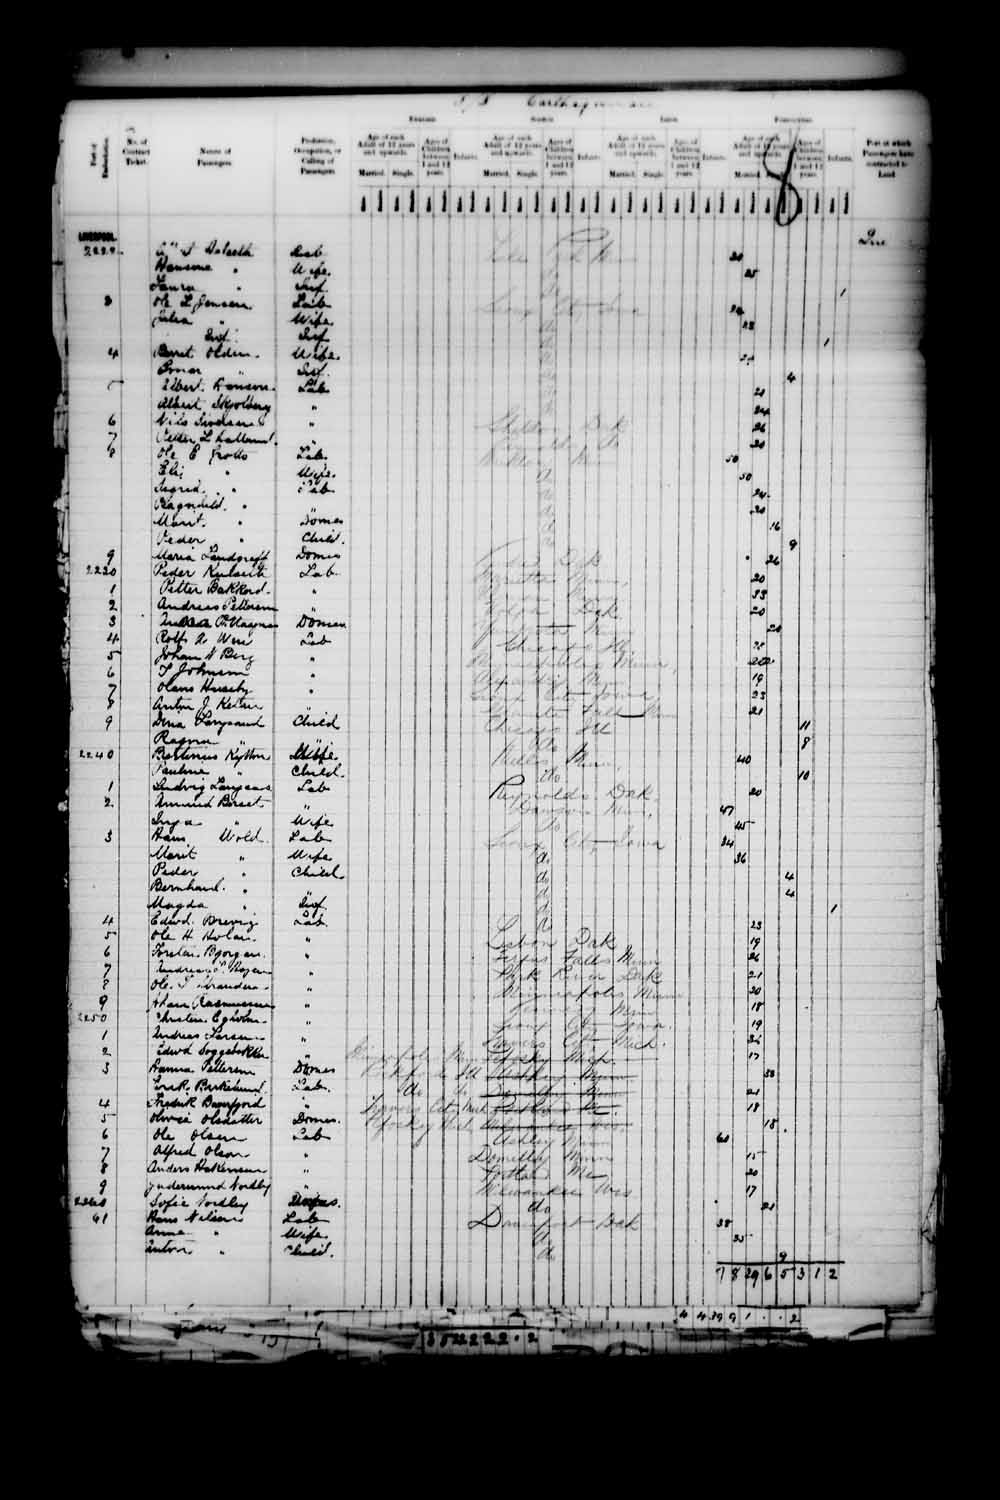 Digitized page of Quebec Passenger Lists for Image No.: e003546738